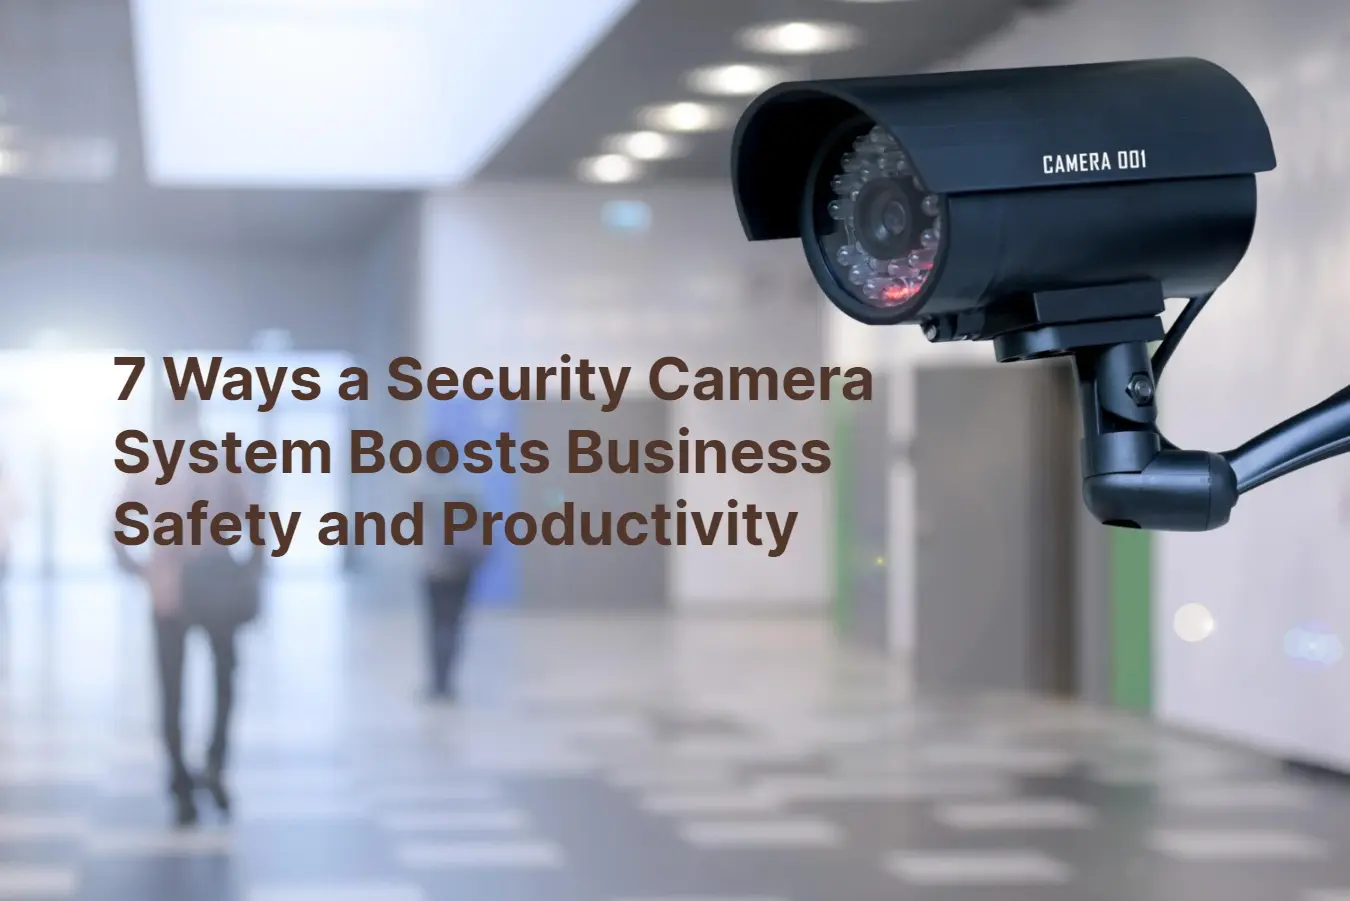 7 Ways a Security Camera System Boosts Business Safety and Productivity